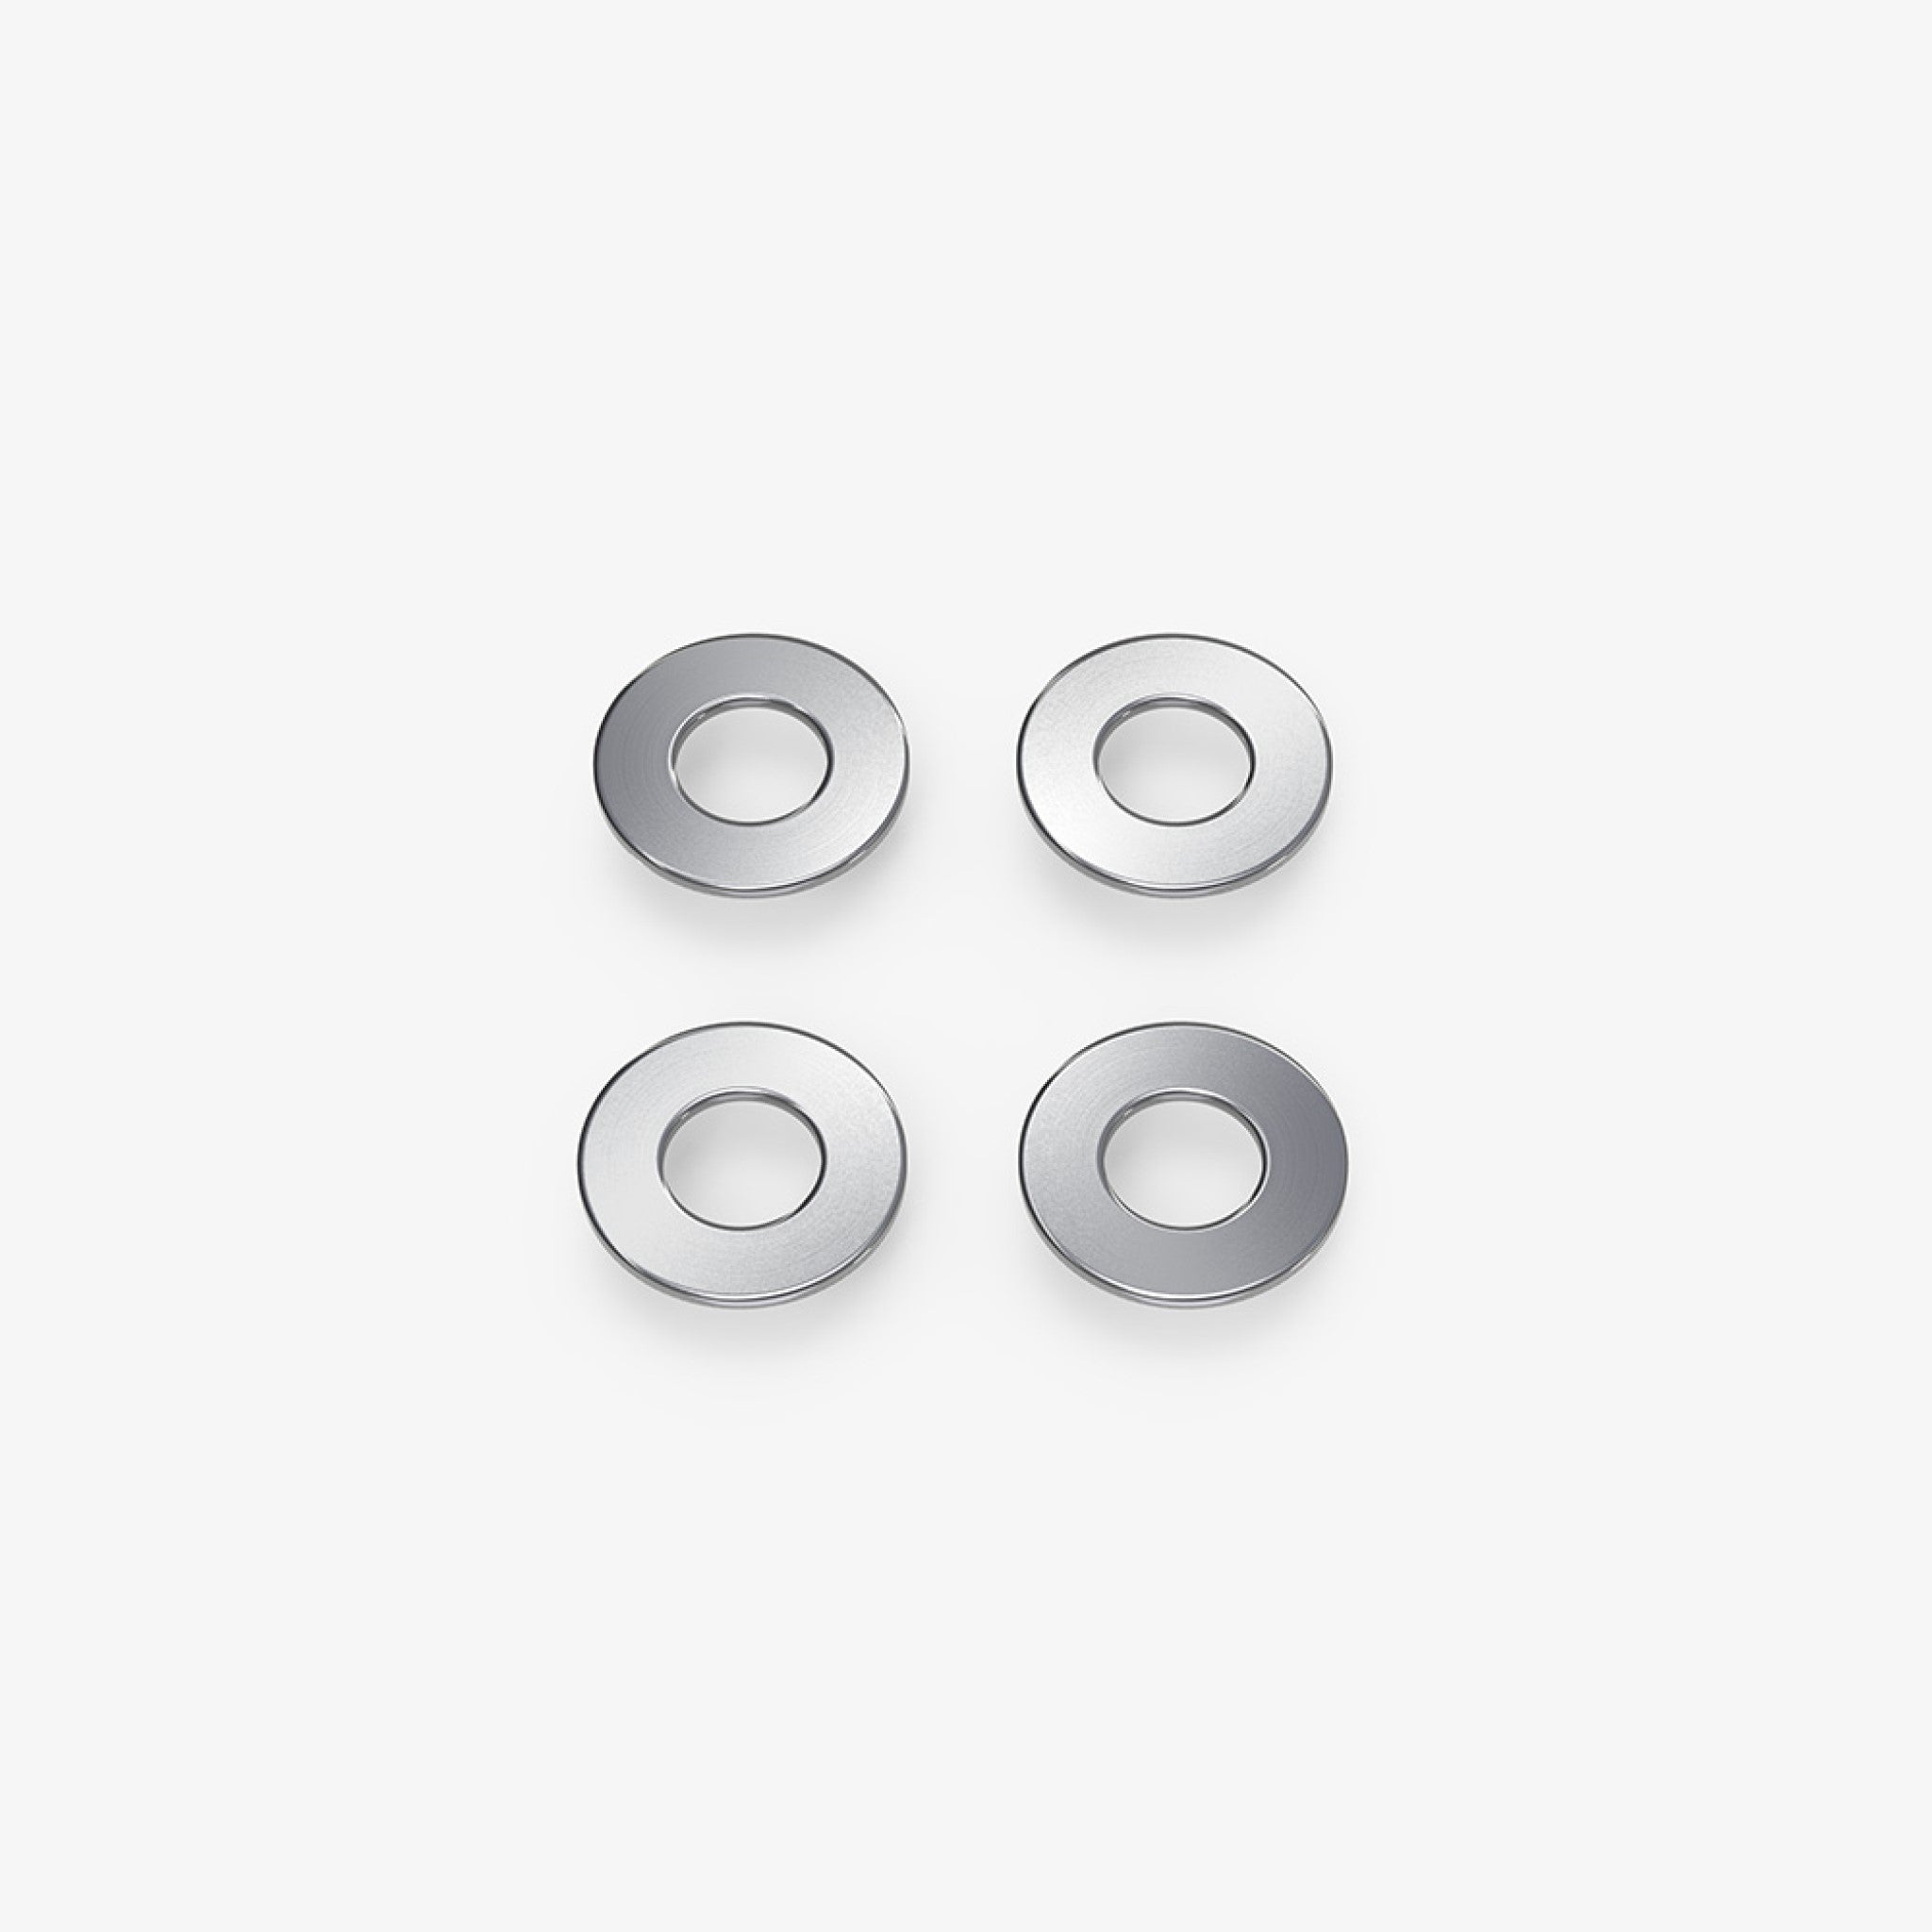 Hardened Steel Washers for Aluminum Lucha Handles and Talisong Z - Flytanium